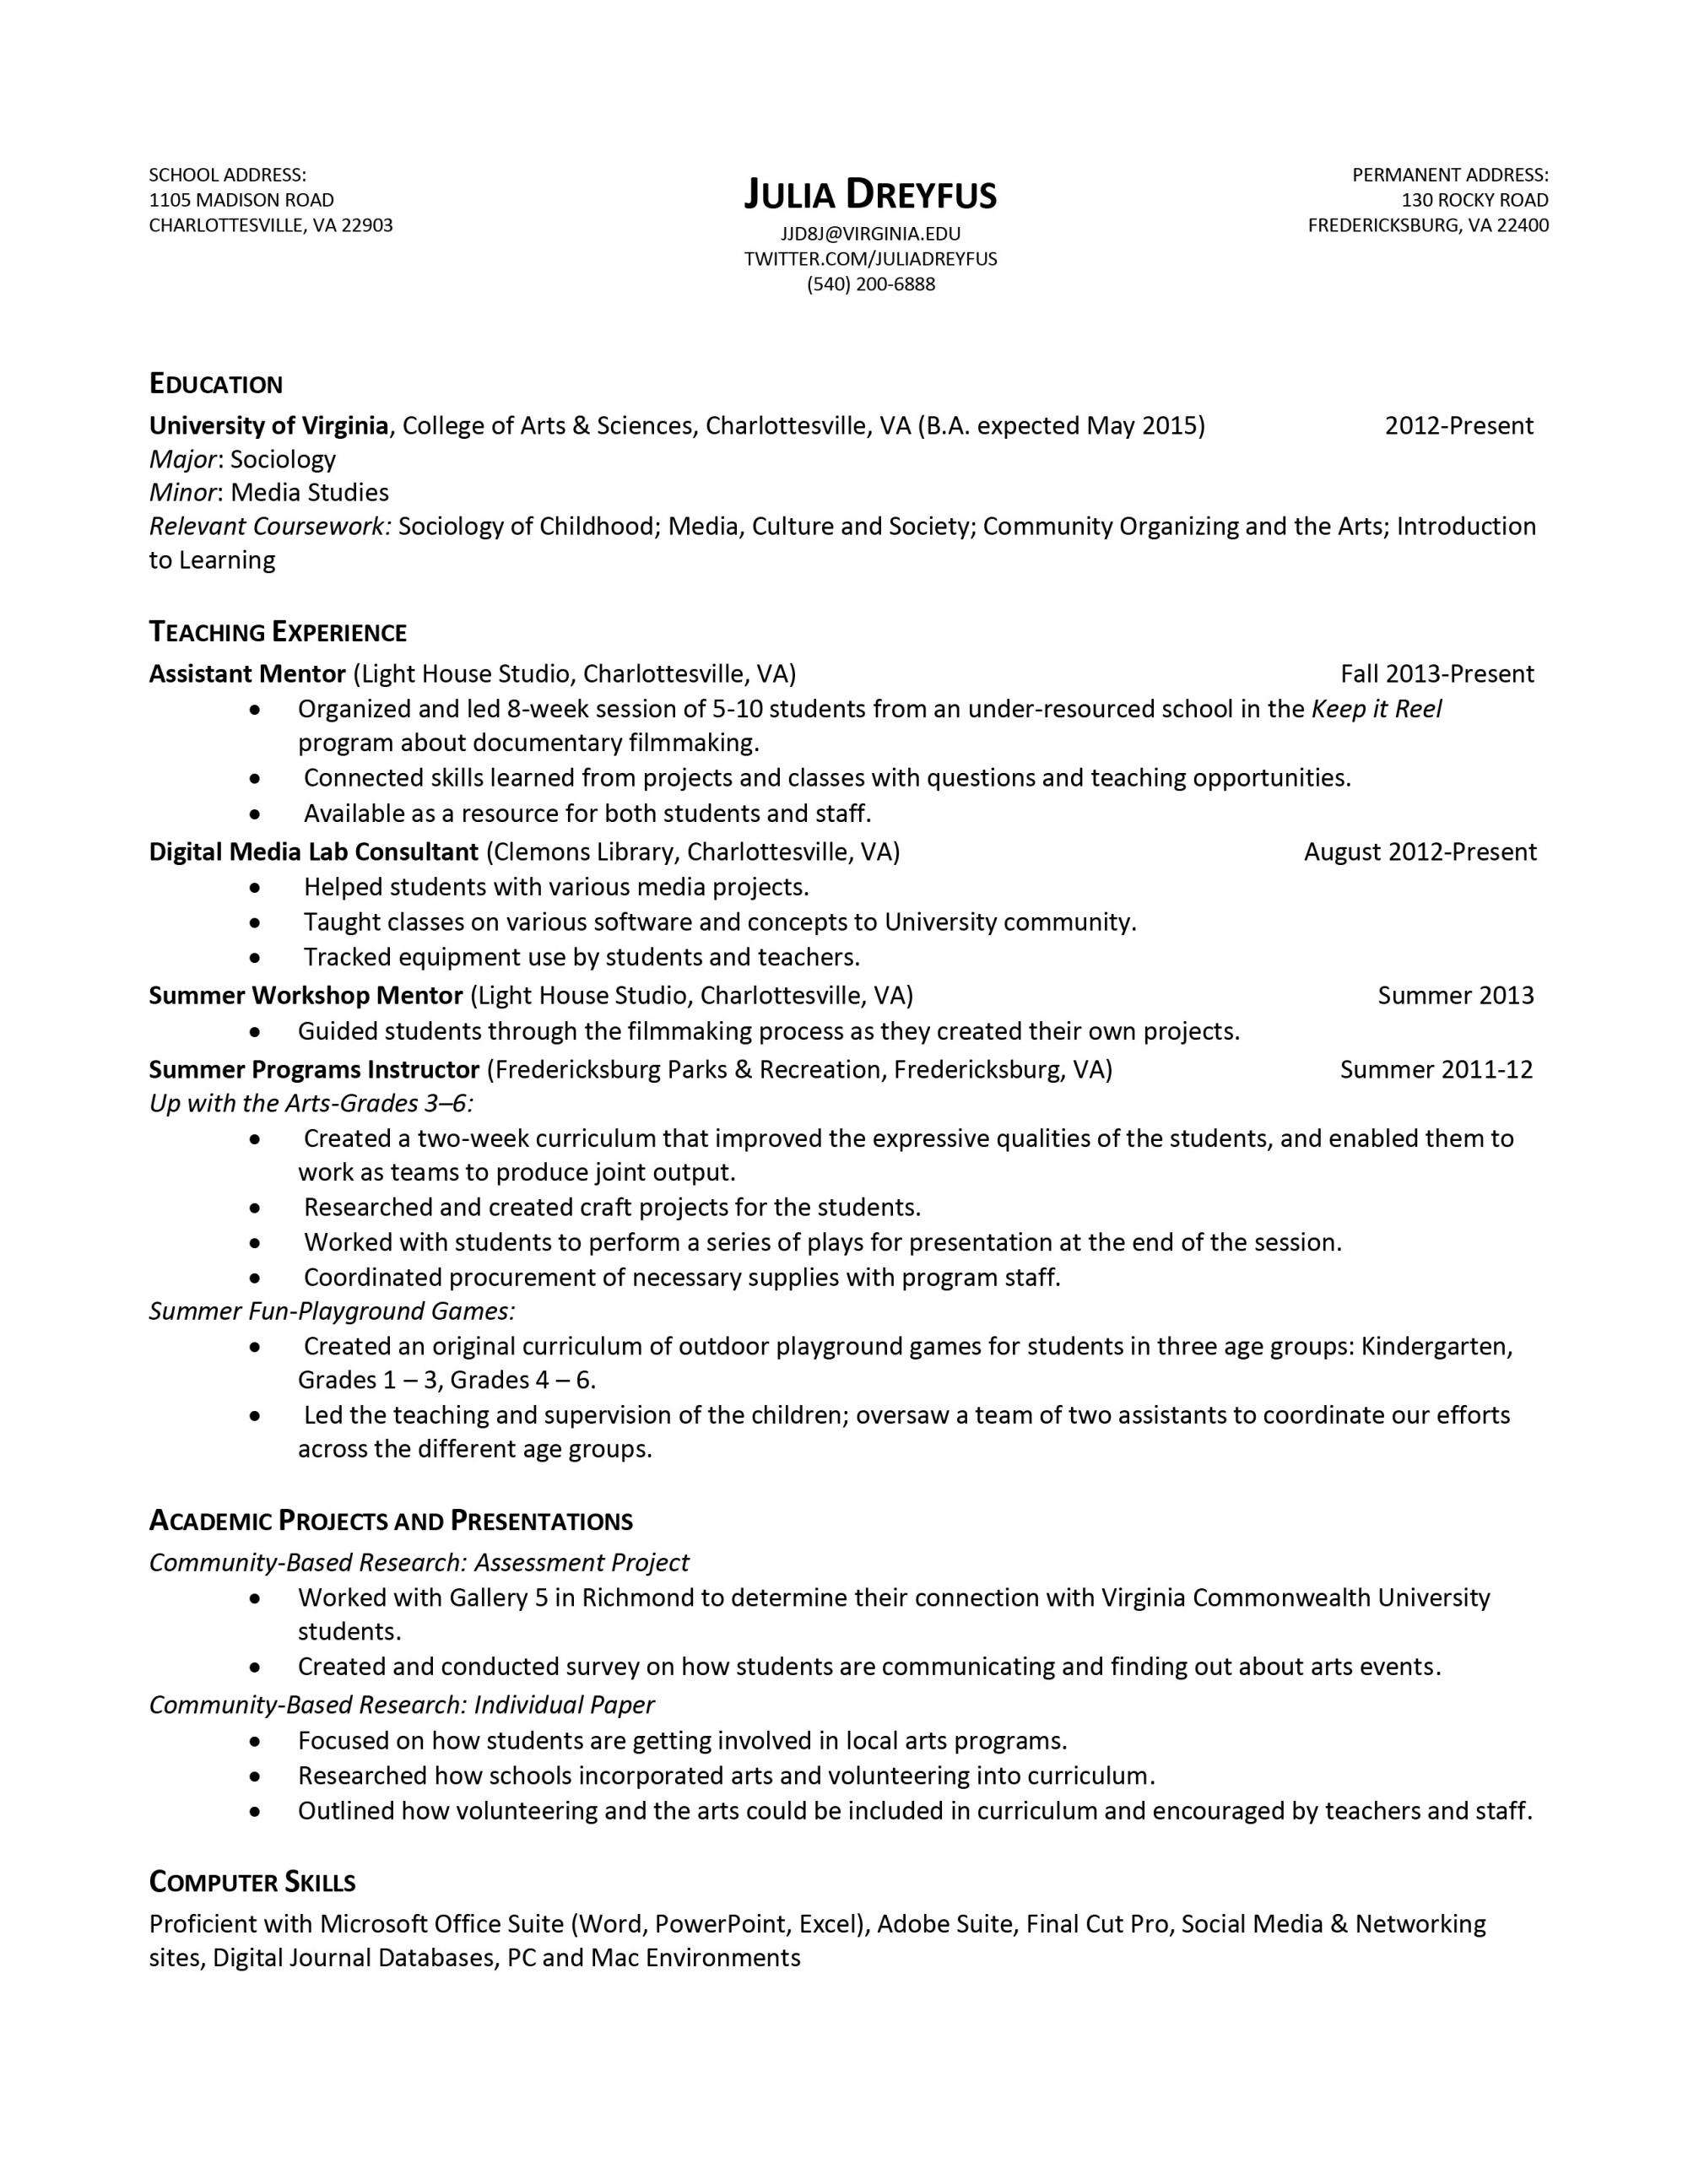 Resume Examples Usa 